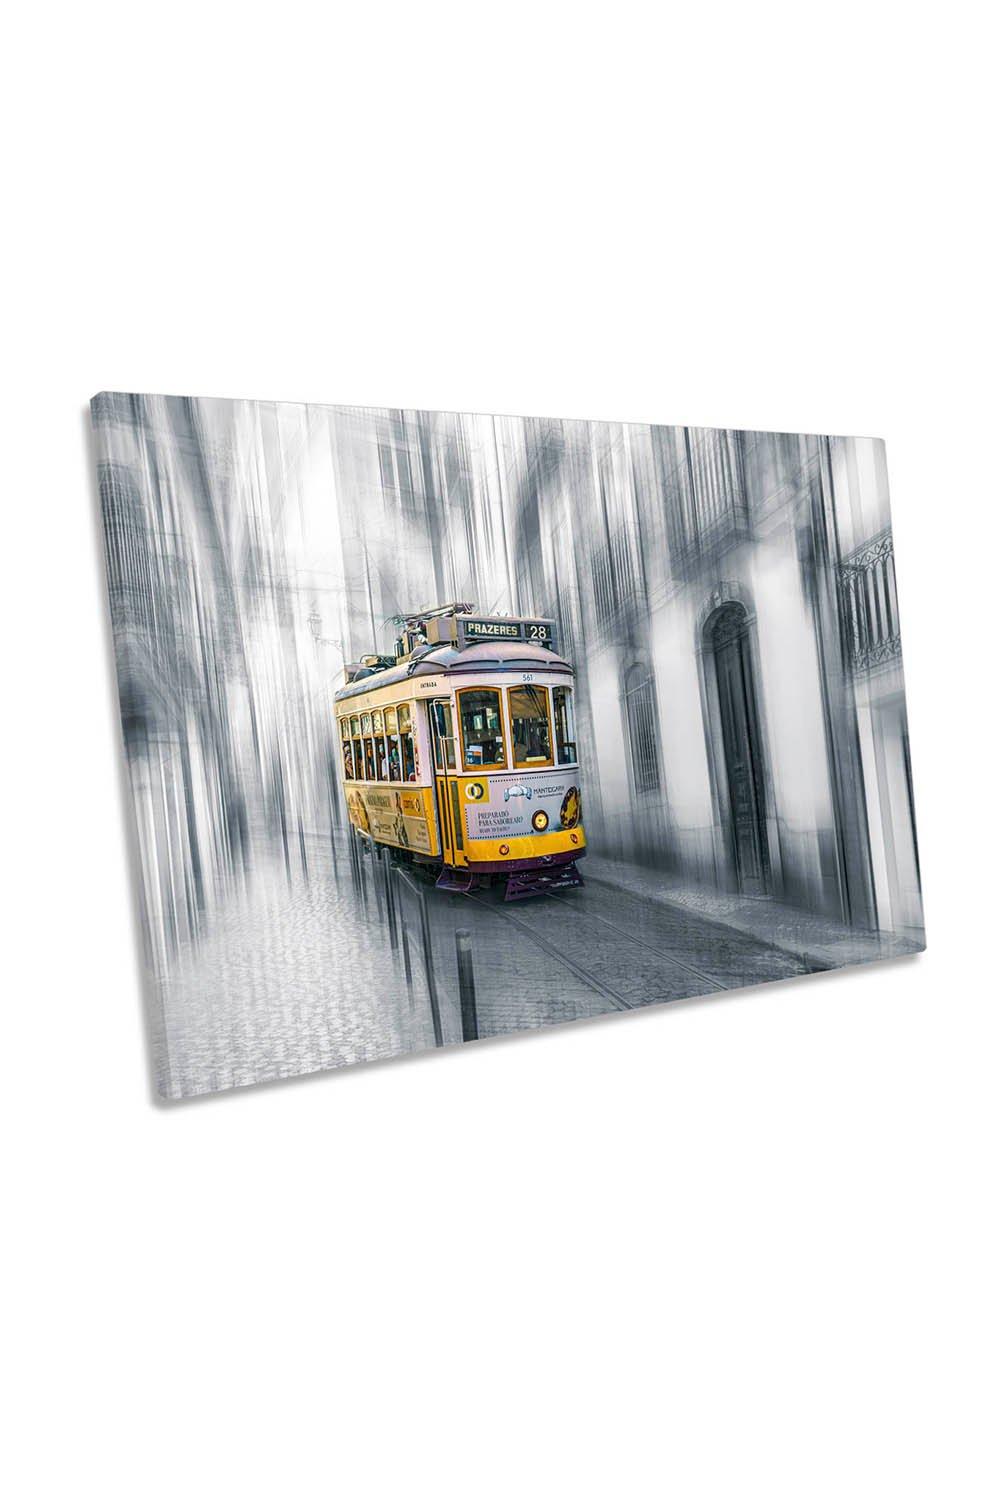 Lisbon Portugal City Yellow Tram Canvas Wall Art Picture Print